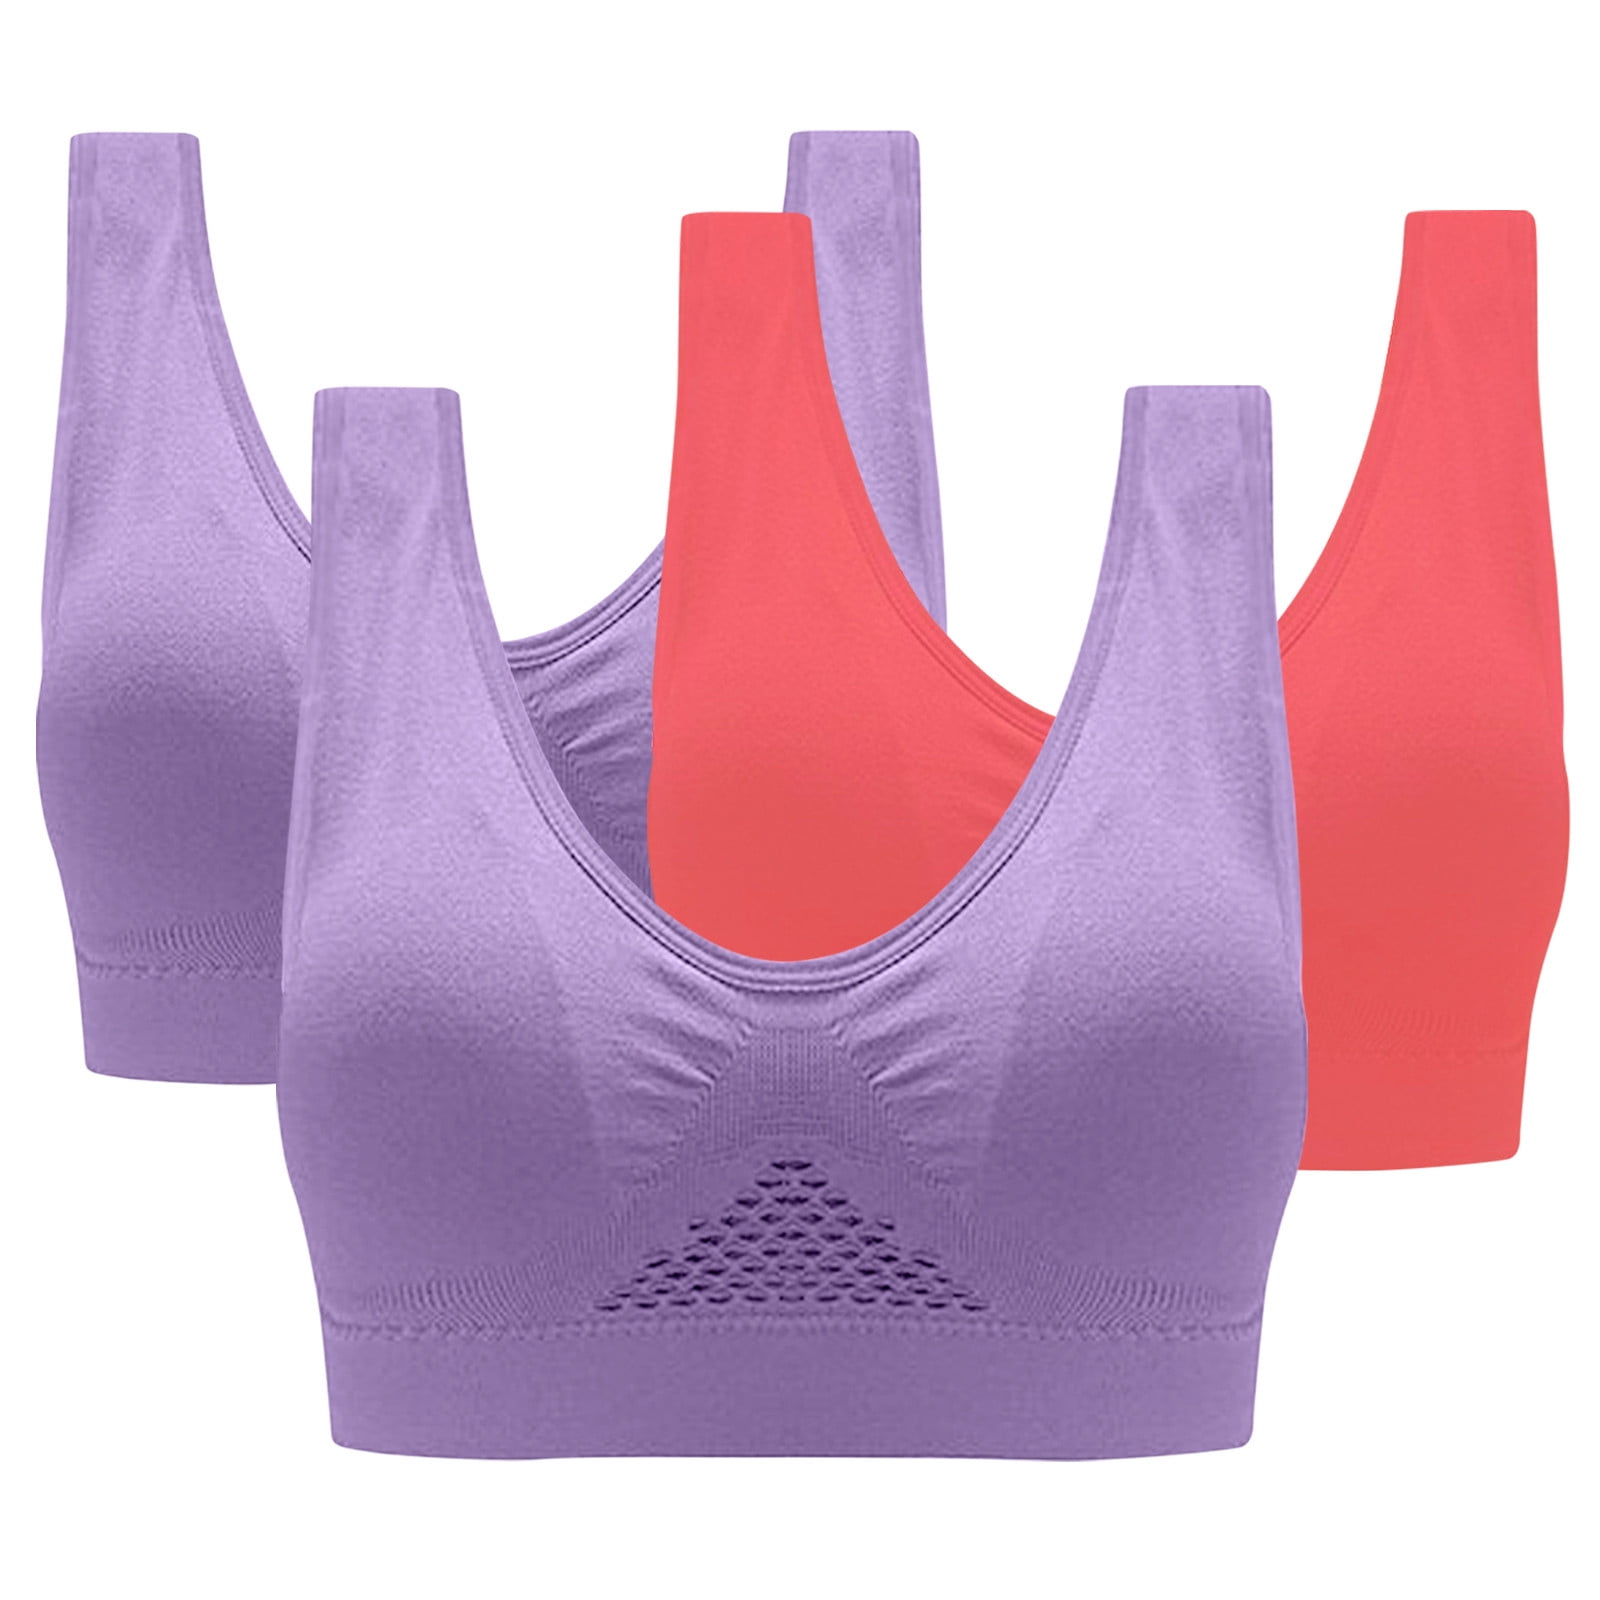 yardsong Women's Plus Size Wireless Bra Breathable High Support